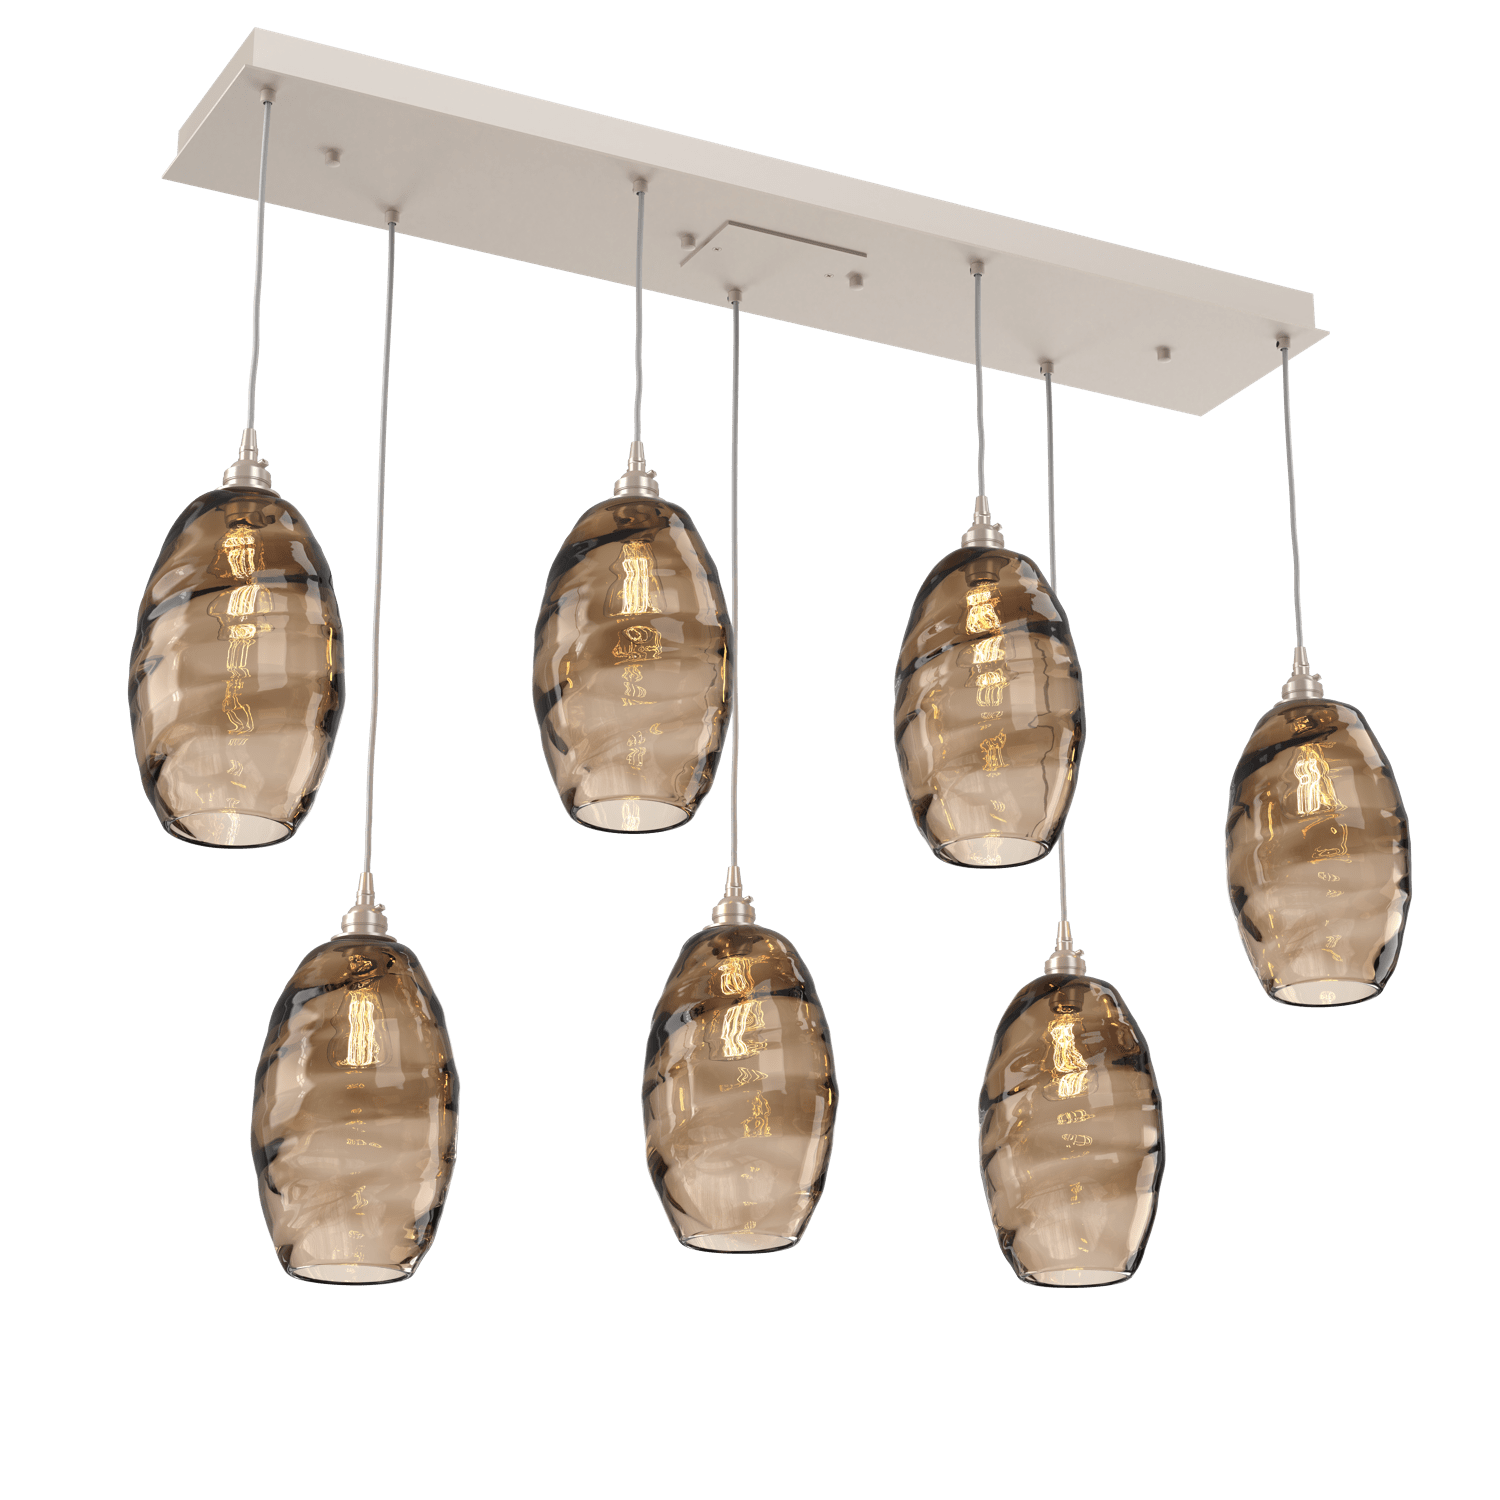 PLB0035-07-BS-OB-Hammerton-Studio-Optic-Blown-Glass-Elisse-7-light-linear-pendant-chandelier-with-metallic-beige-silver-finish-and-optic-bronze-blown-glass-shades-and-incandescent-lamping